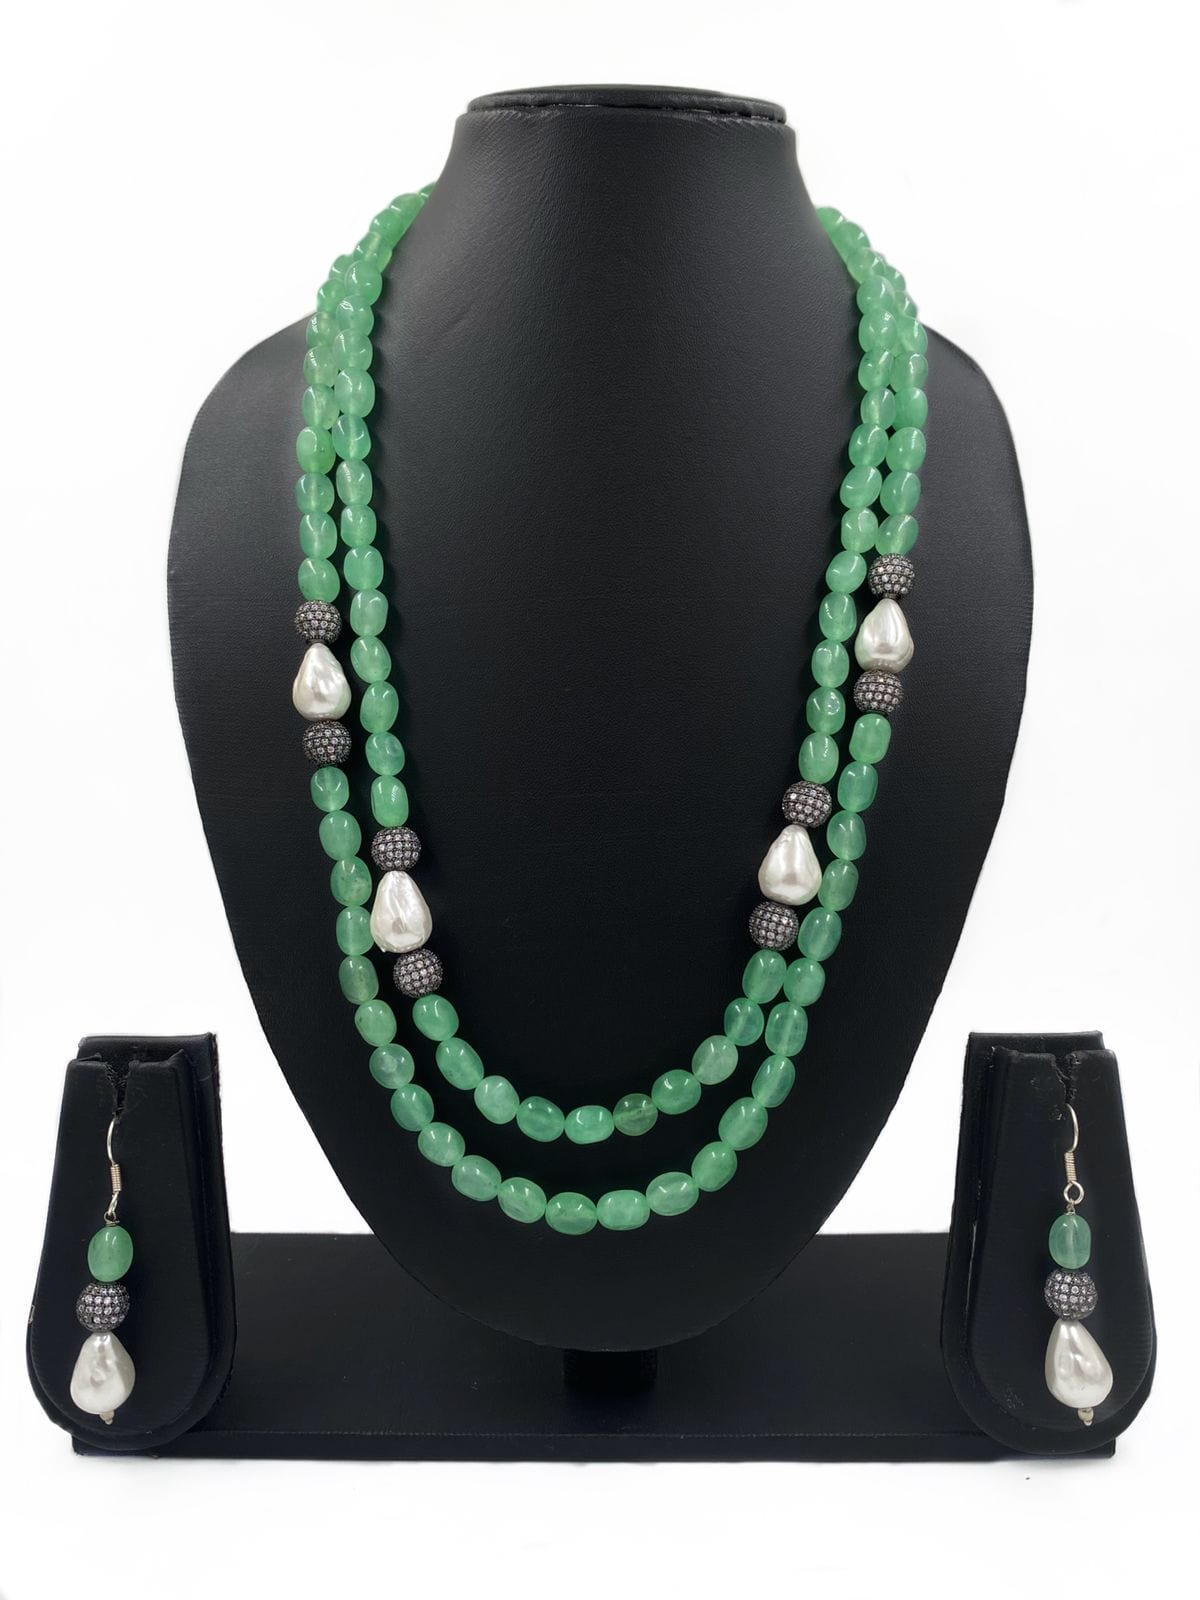 Fancy Mint Green Jade Beads Necklace With Pearls For Women By Gehna Shop Beads Jewellery